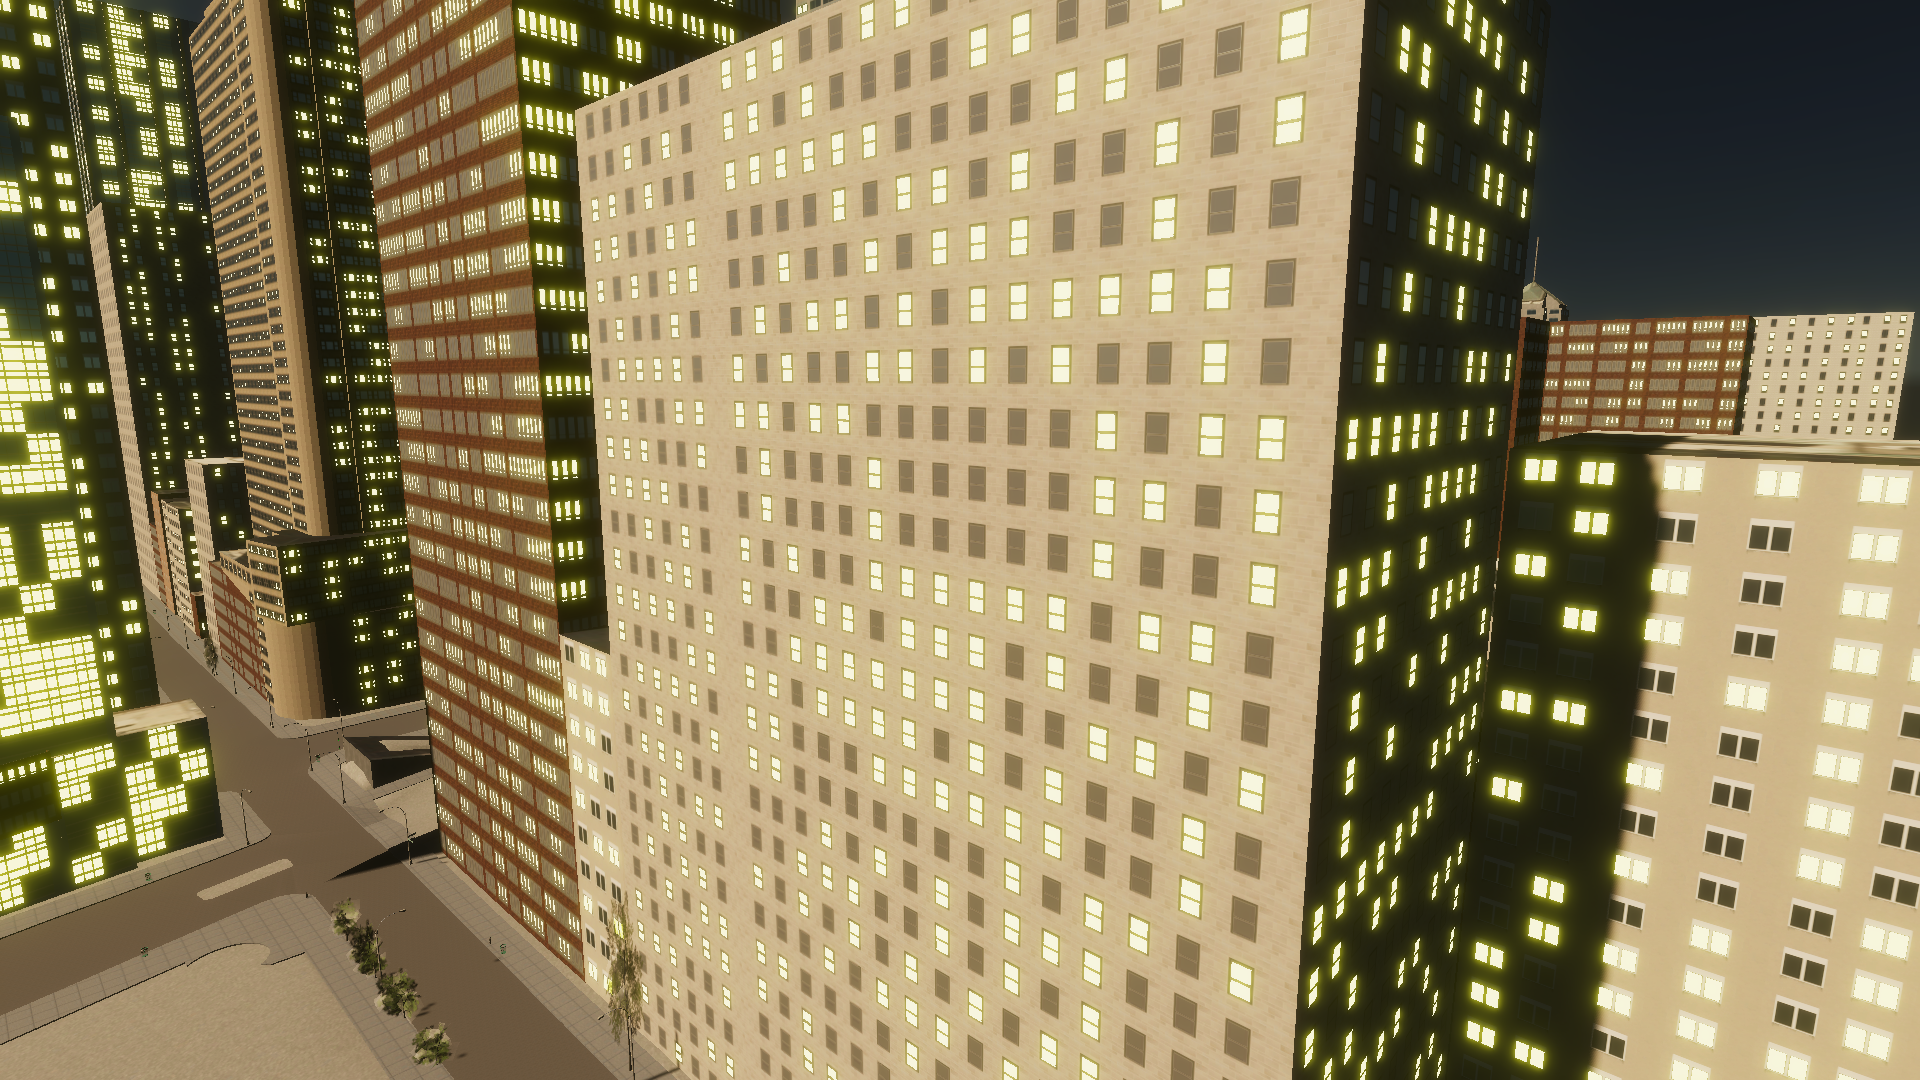 This shows buildings with half of the windows glowing.